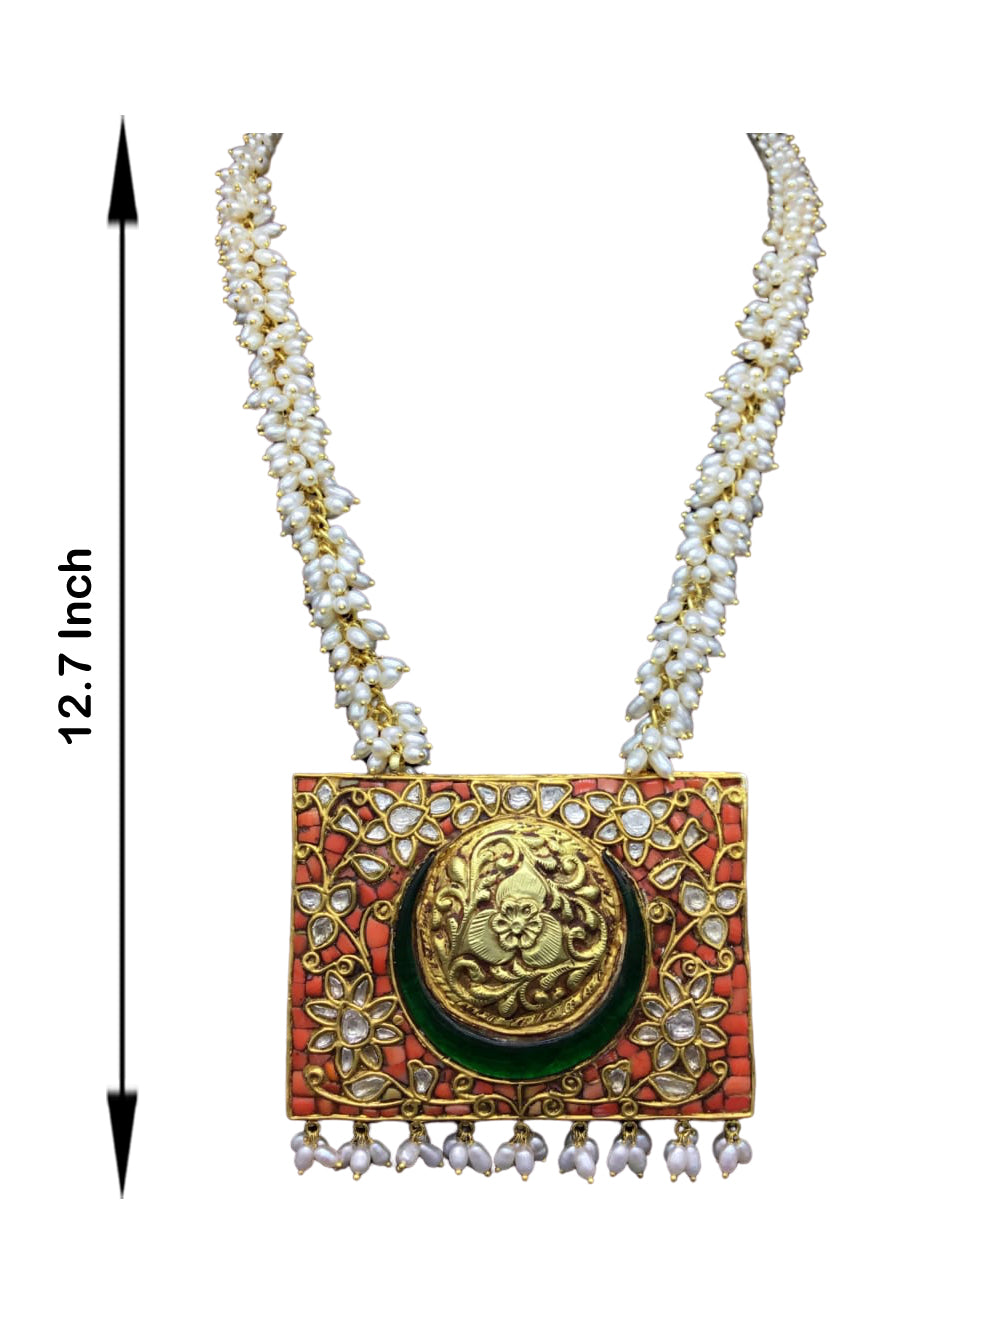 18k Gold and Diamond Polki rectangle Coral Pendant with Natural Hyderabadi Pearls